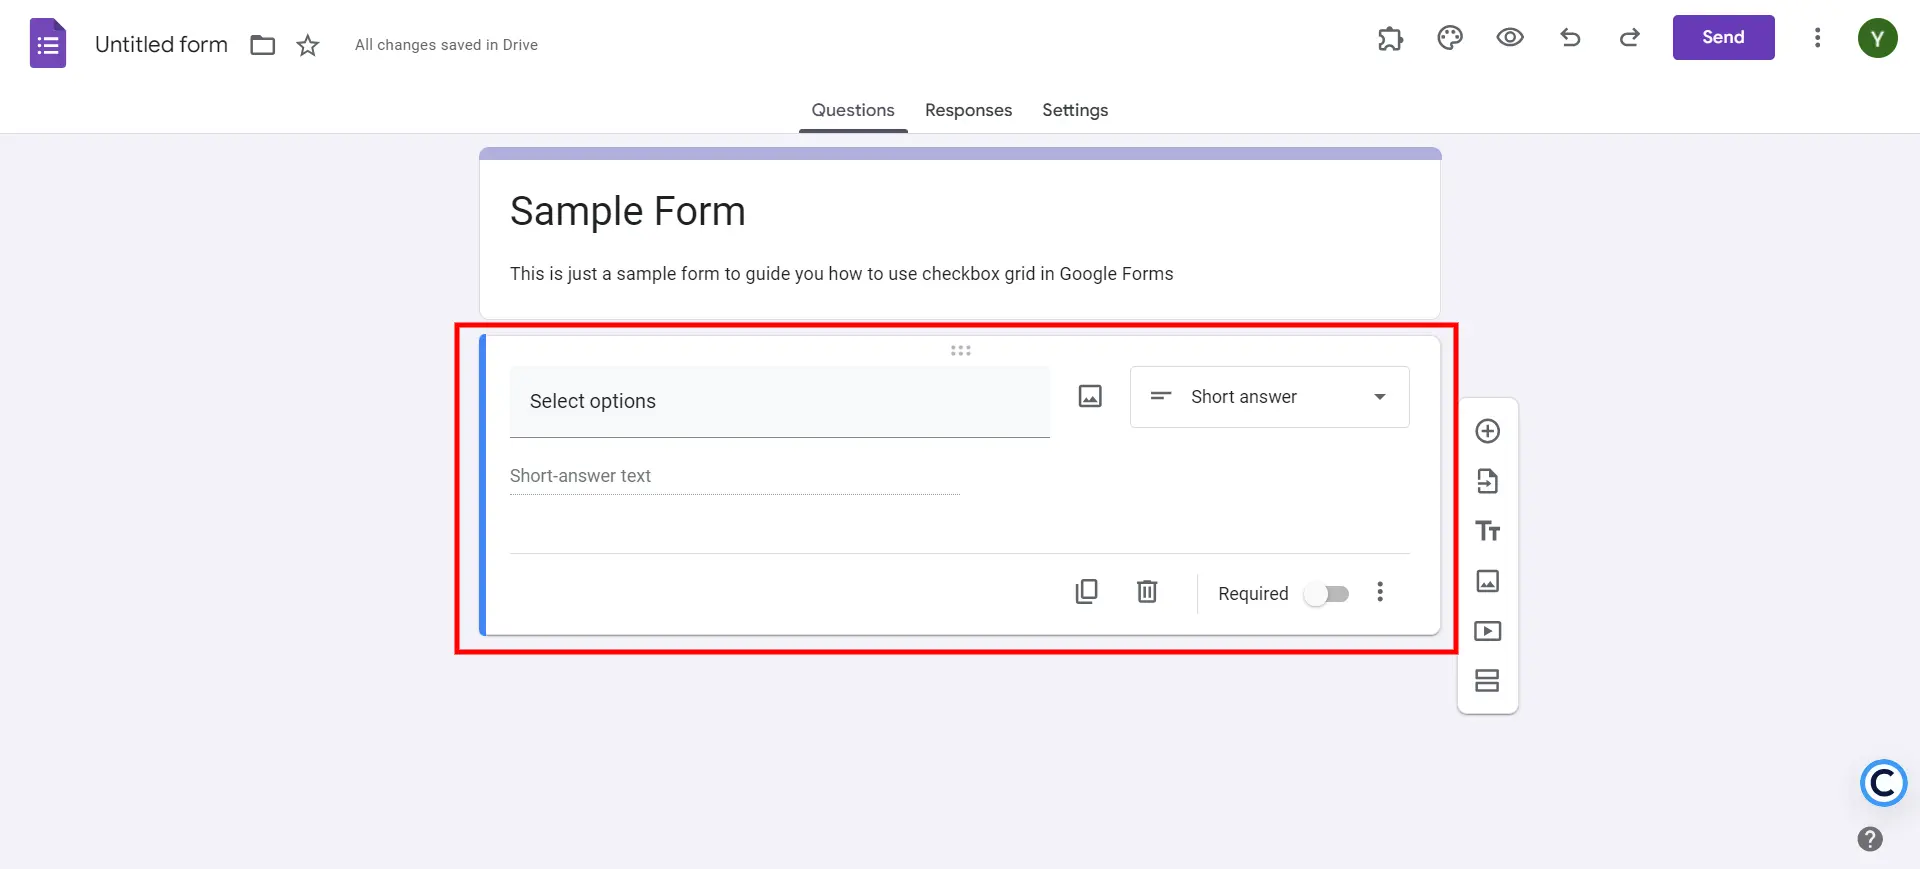 Checkbox Grid in Google Forms - Add questions